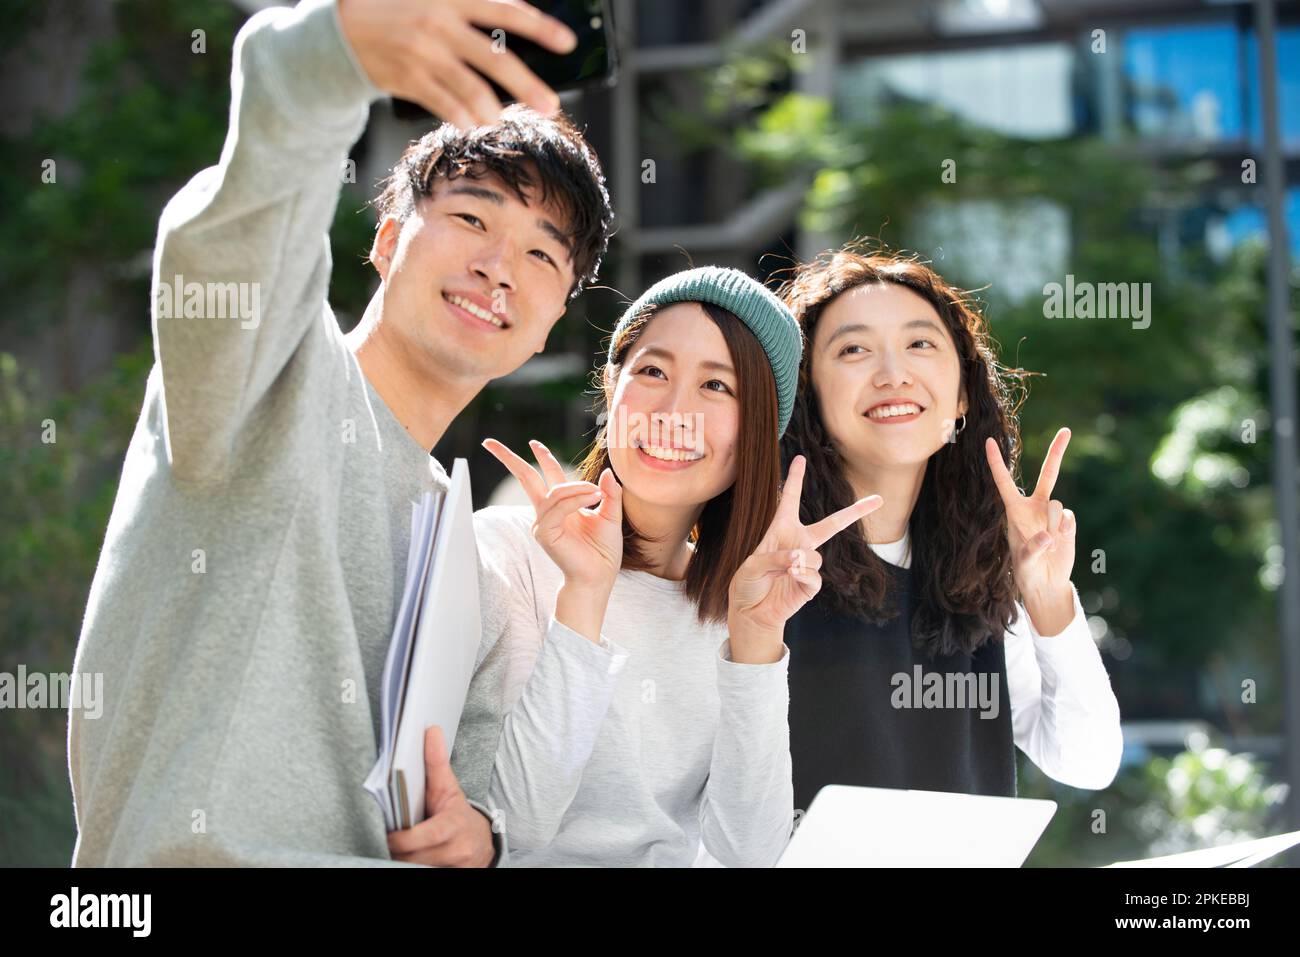 Three students smiling and taking selfies Stock Photo